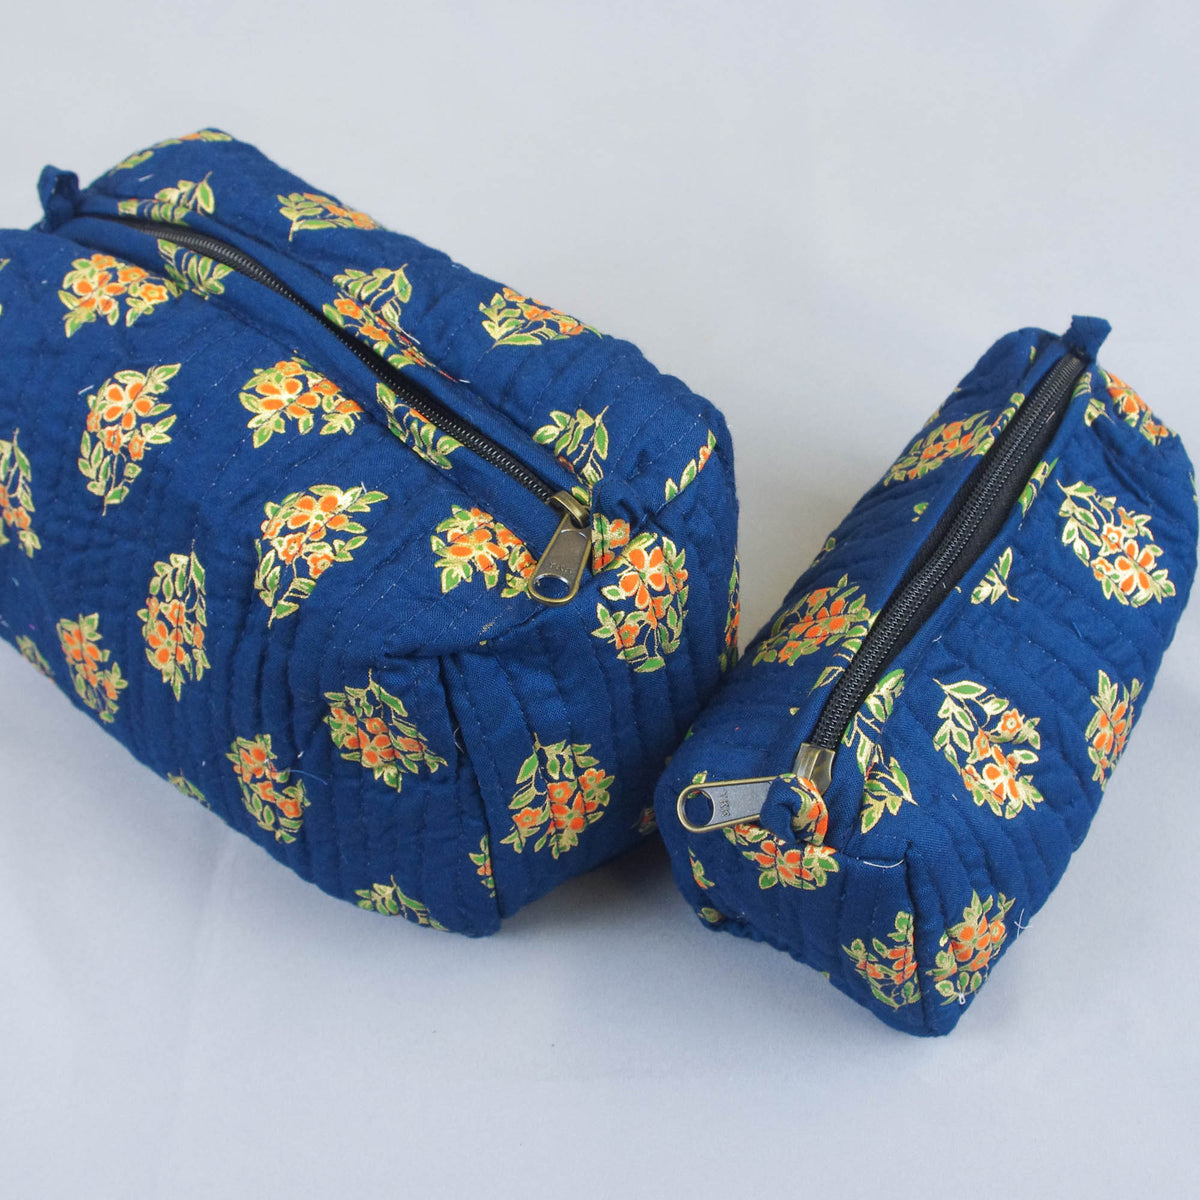 Set of 2 X Block Print Quilted Toiletry Bag - Navy Blue Floral